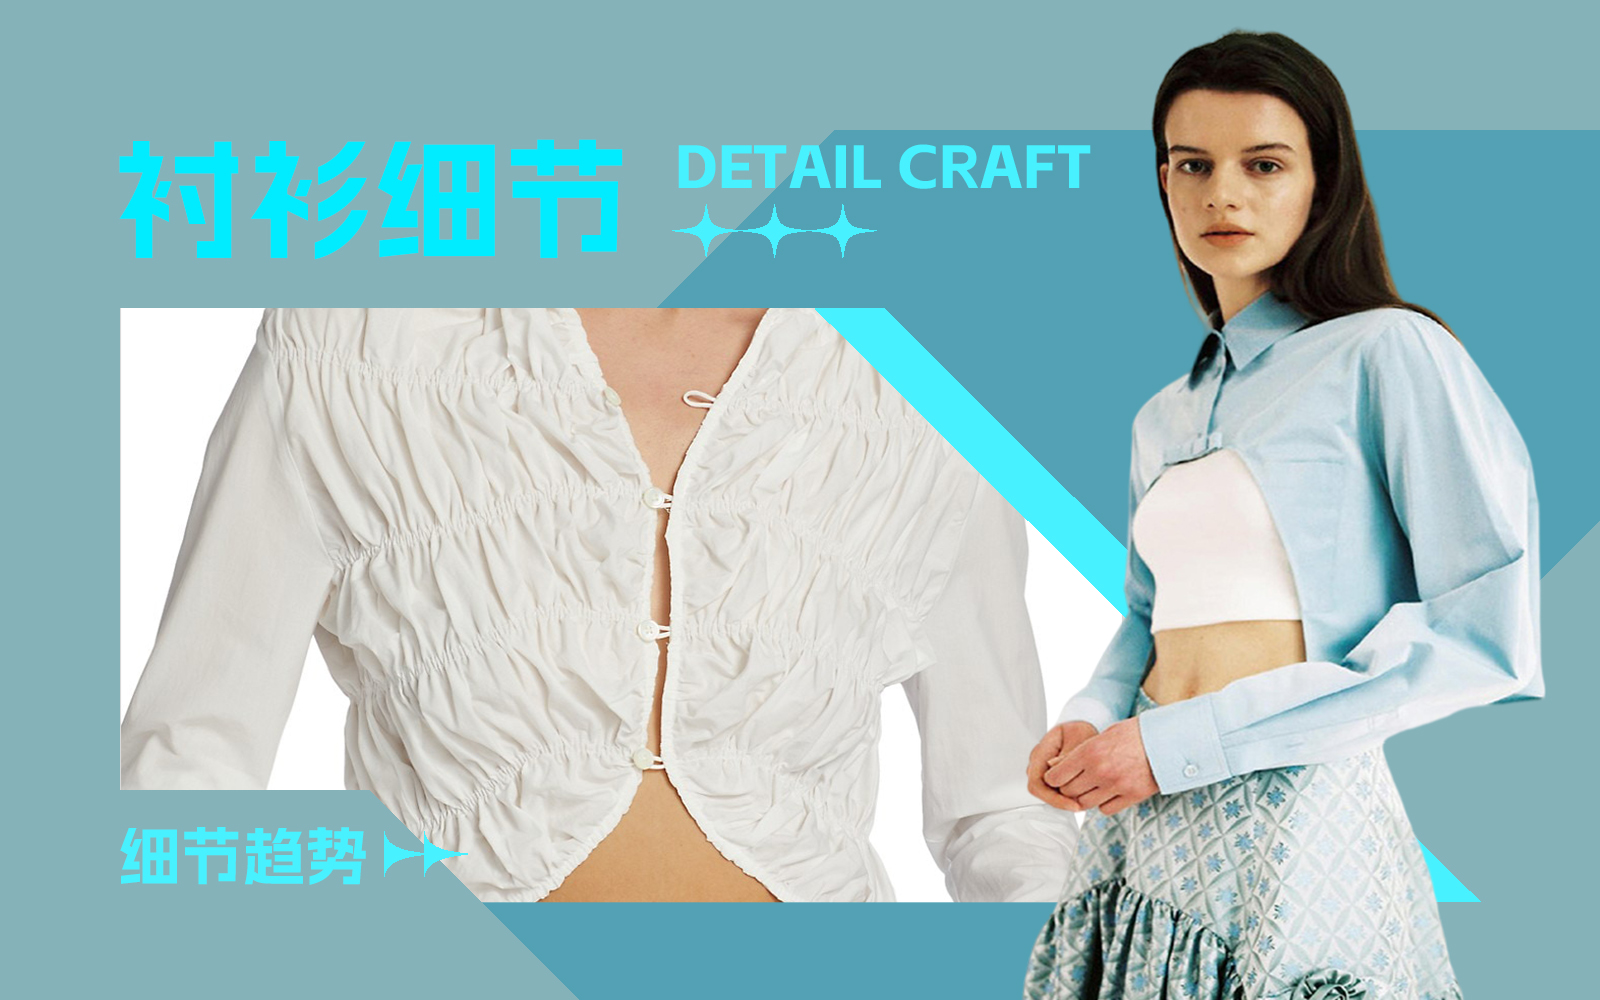 Sweet Ladies -- The Detail & Craft Trend for Women's Shirt